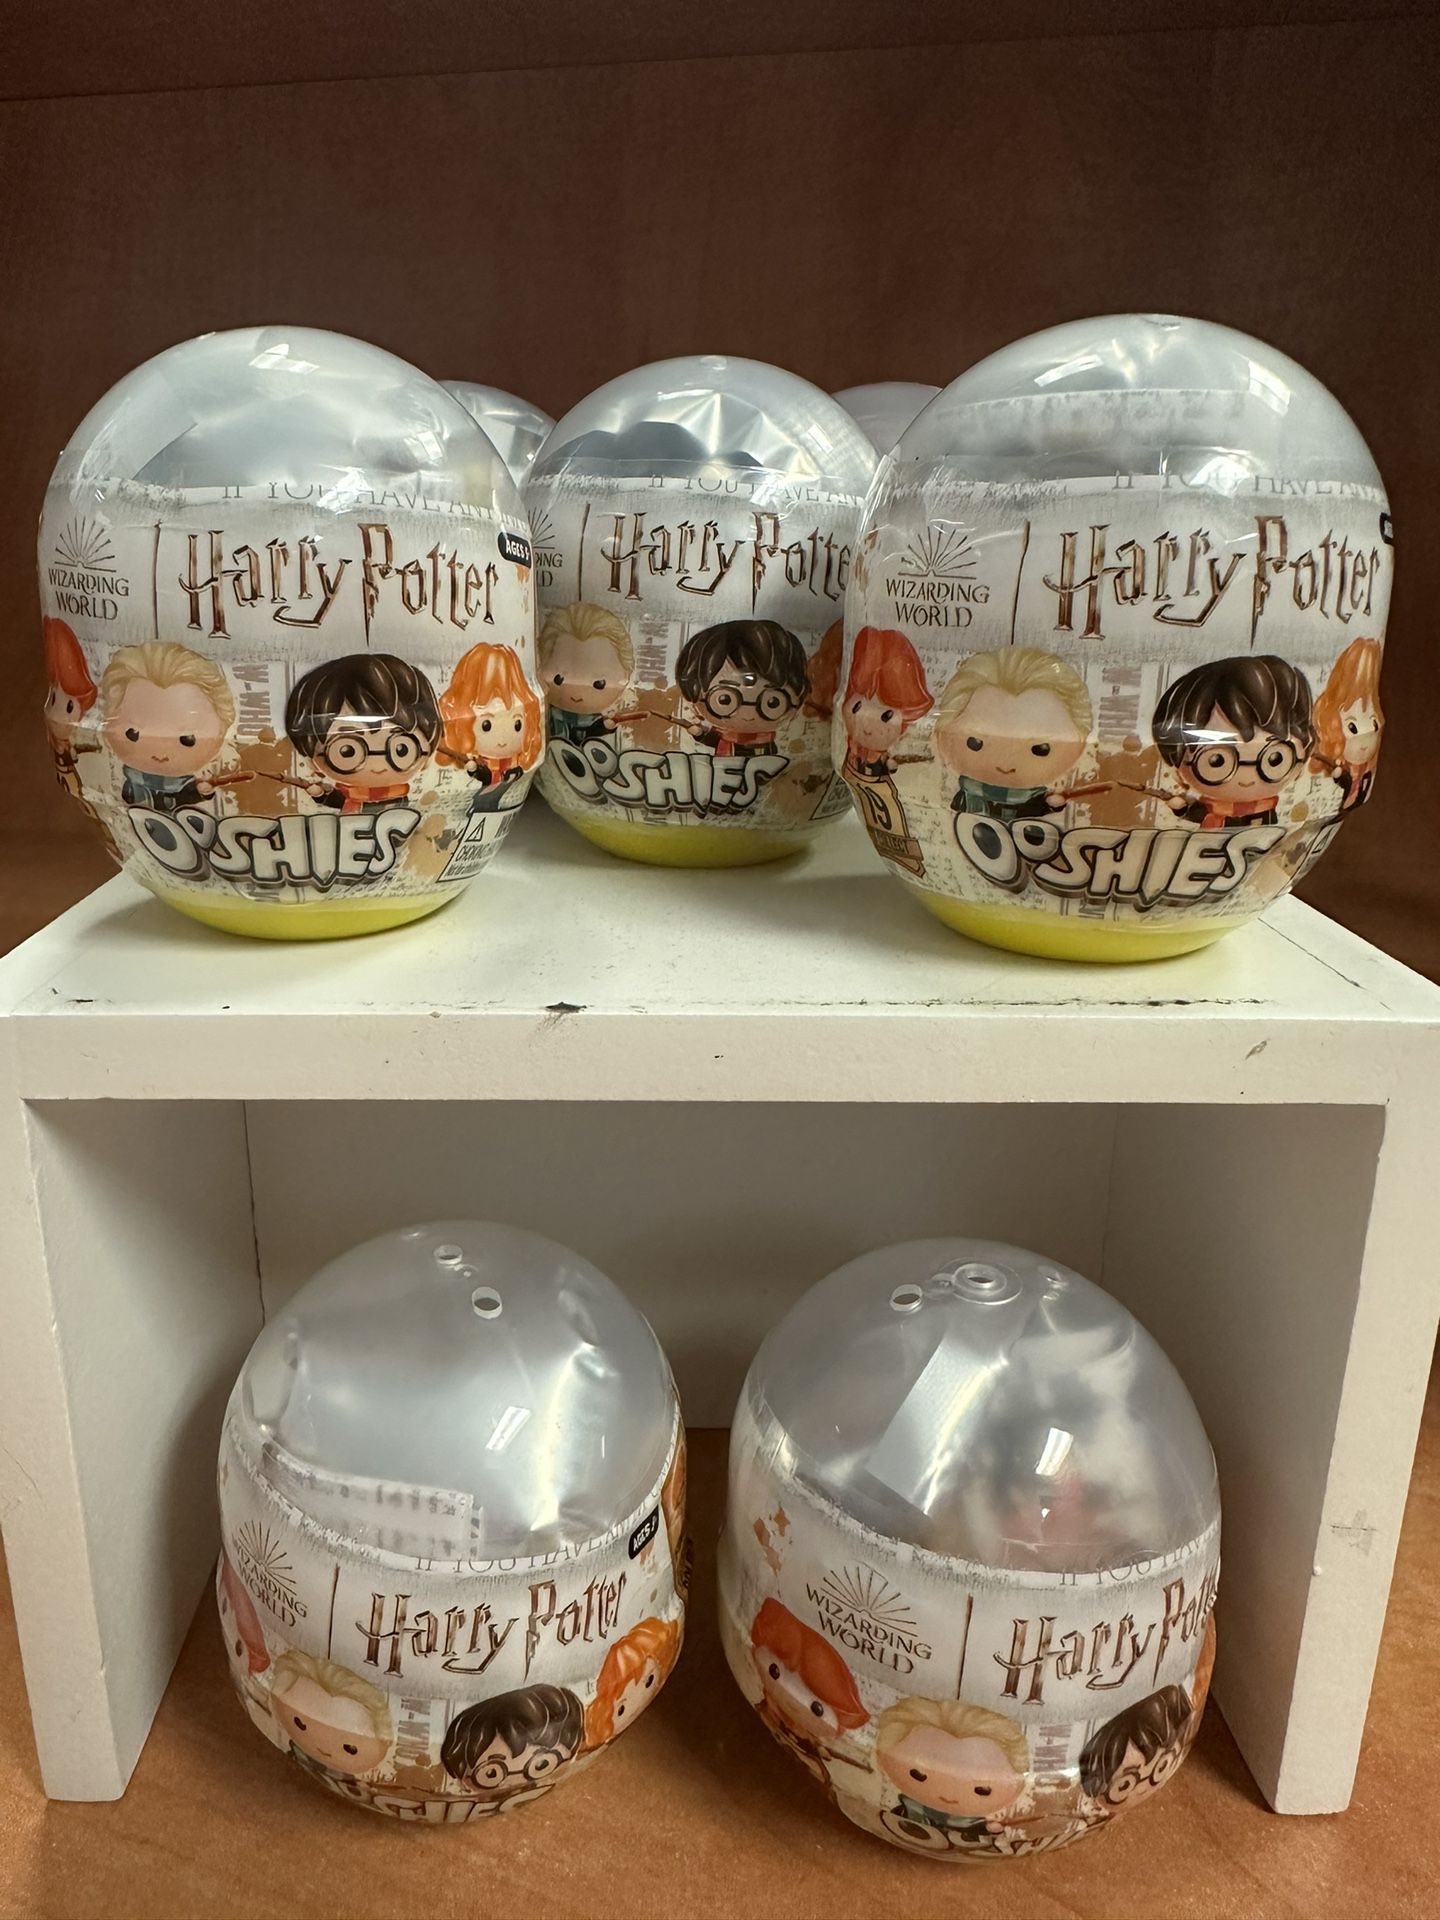 Ooshies Collectibles Harry Potter Lot Of 7 Sealed Capsules Wizarding World New